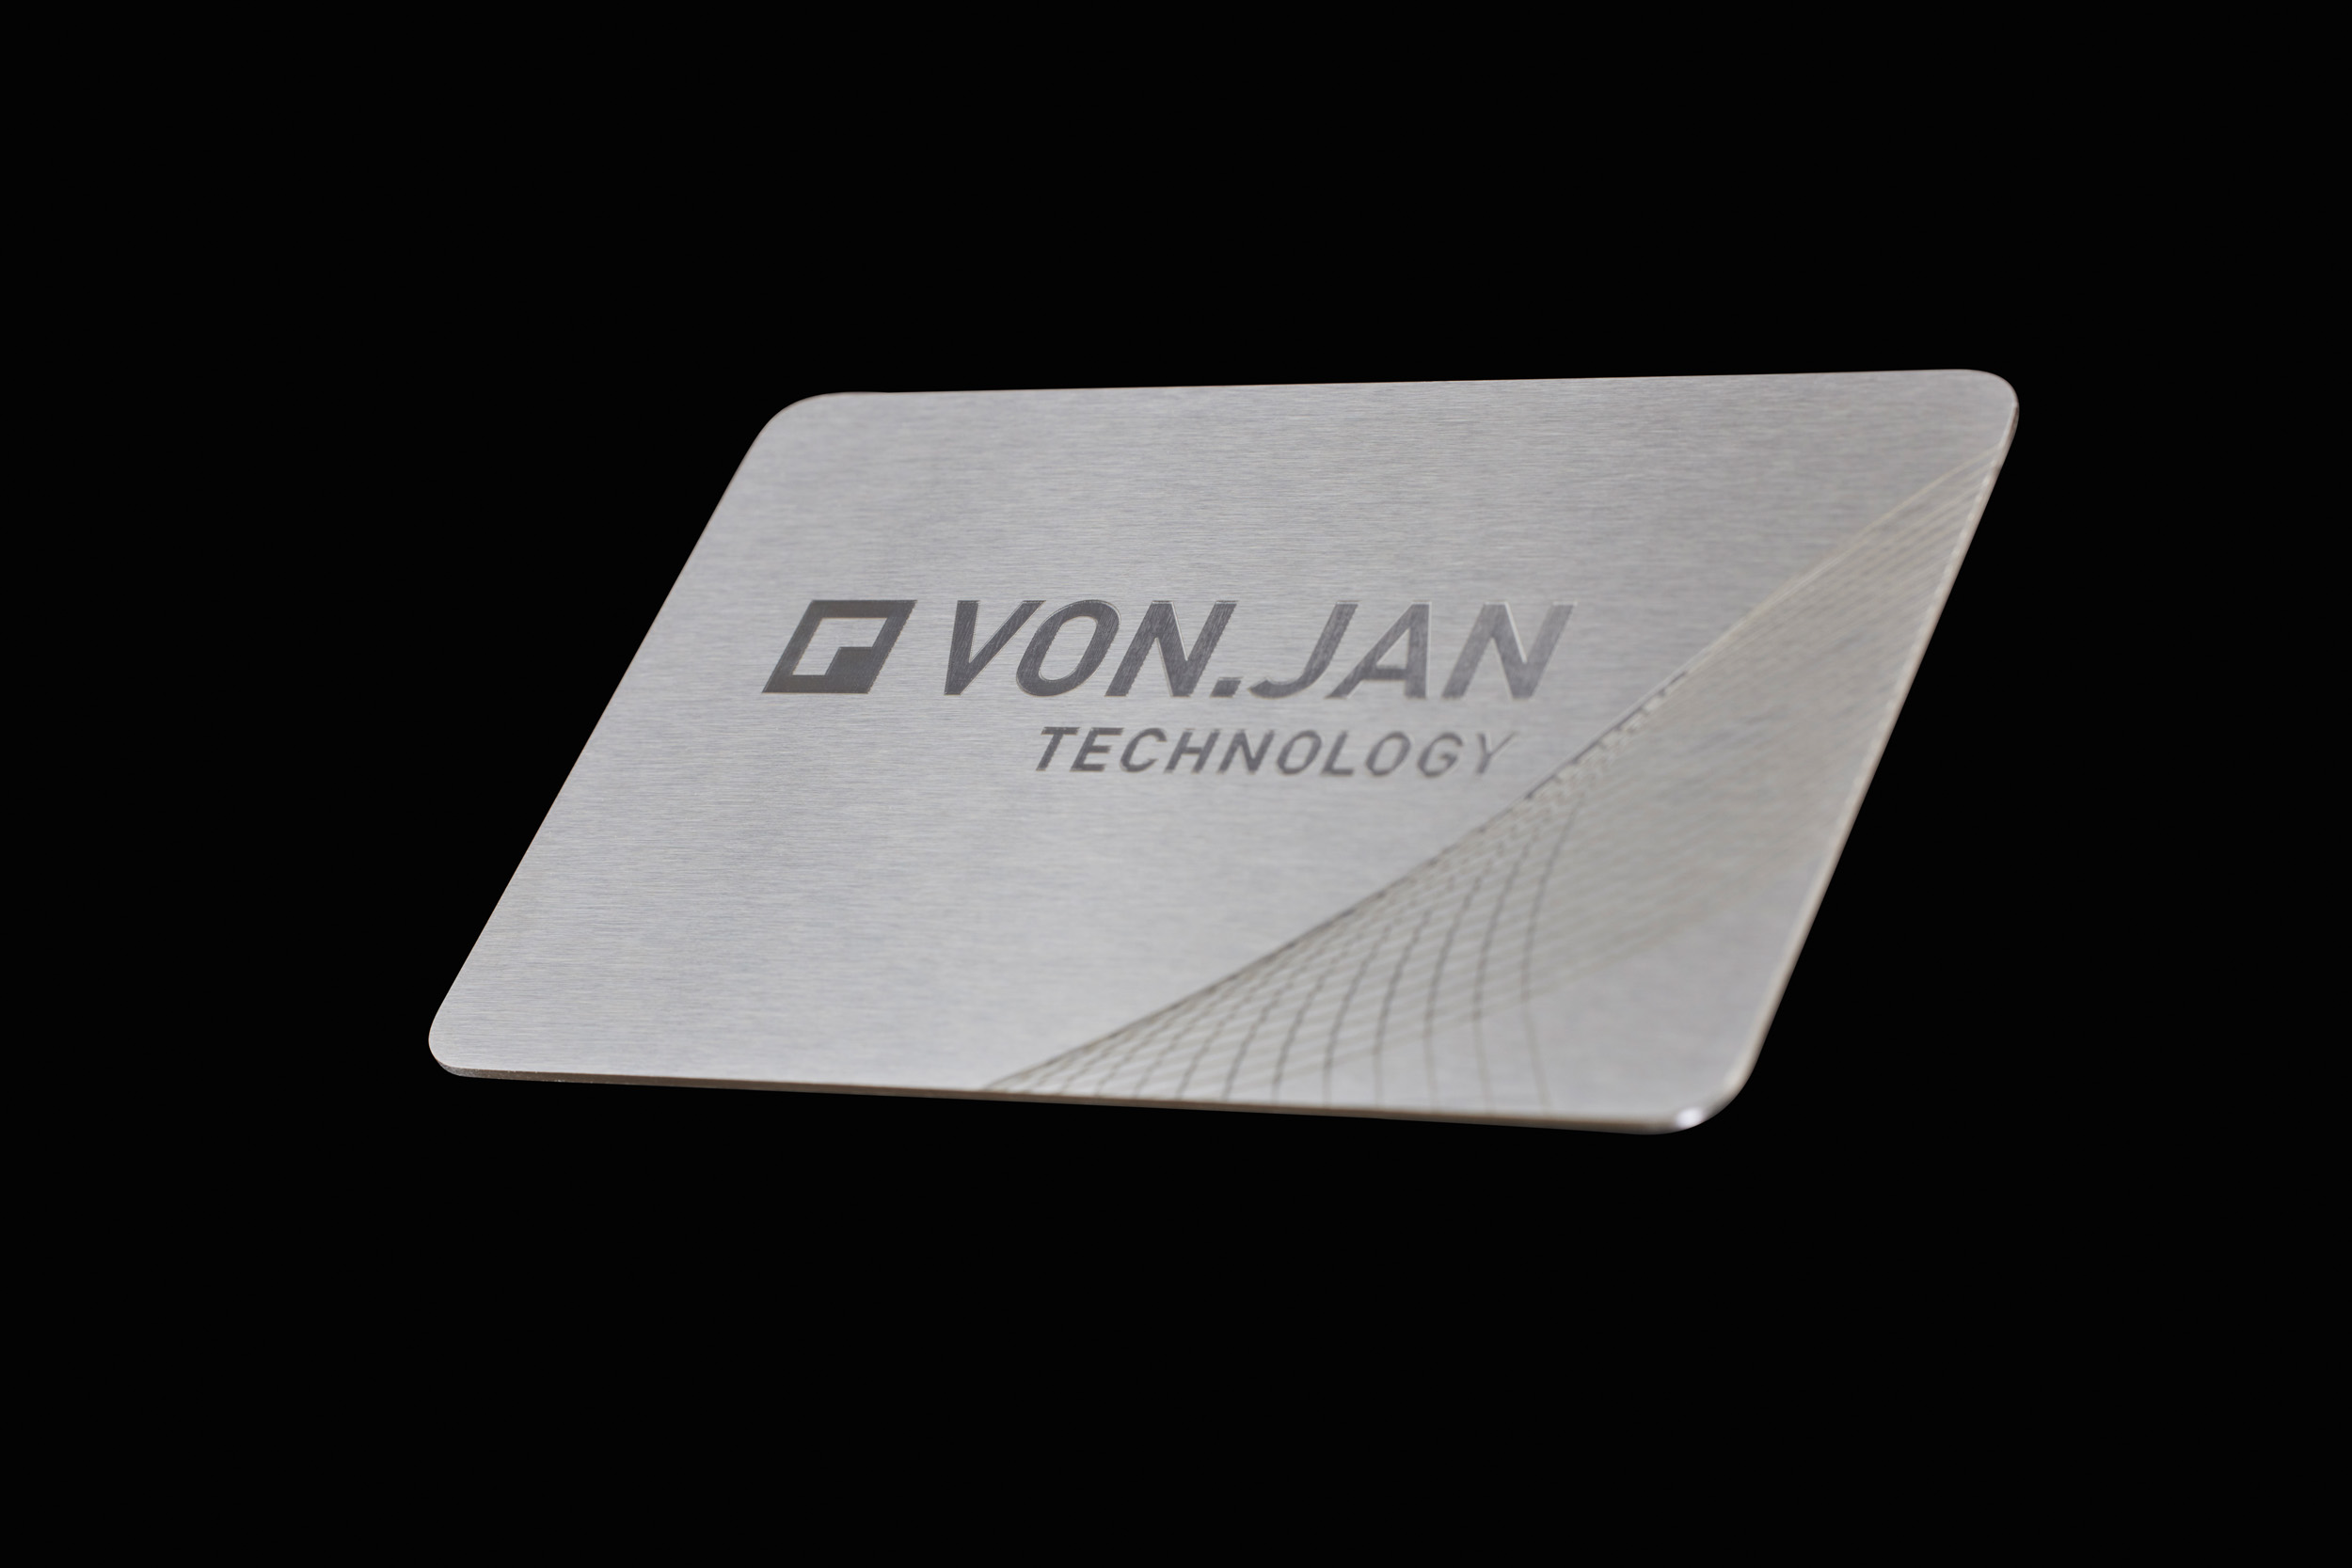 Polishing marking of the VONJAN logo on a stainless steel card.